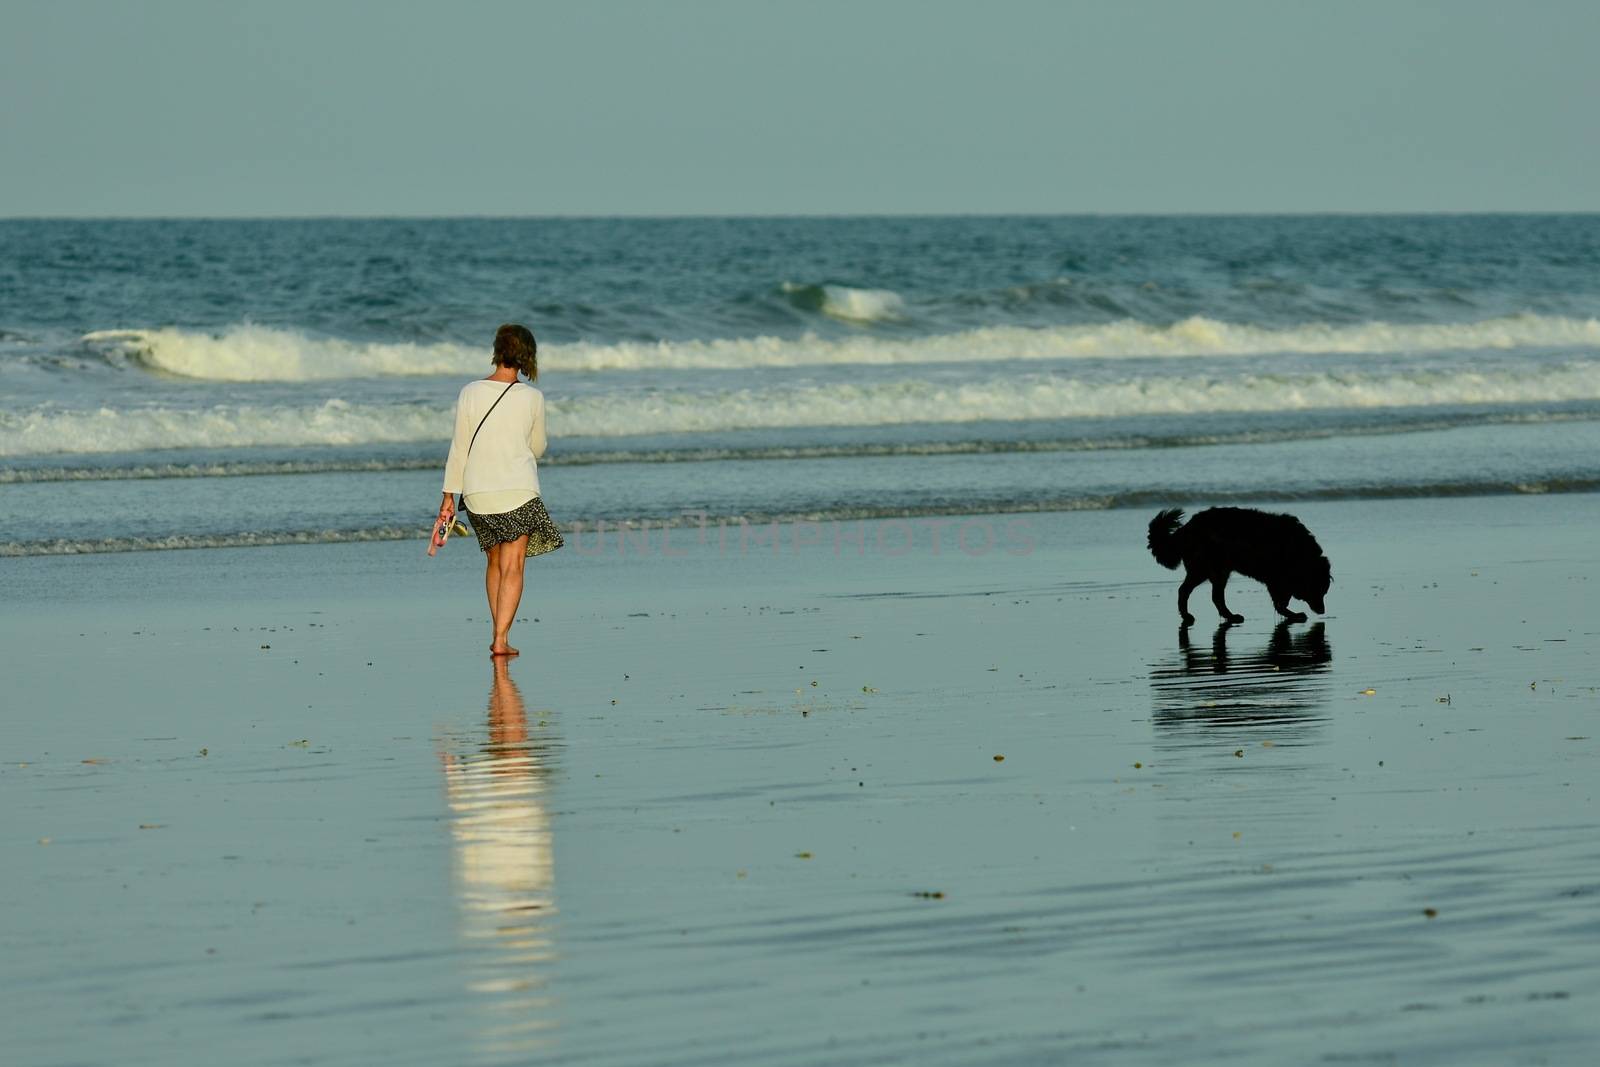 An unidentified young woman enjoying a walk on the beach, with her dog exploring the beach.